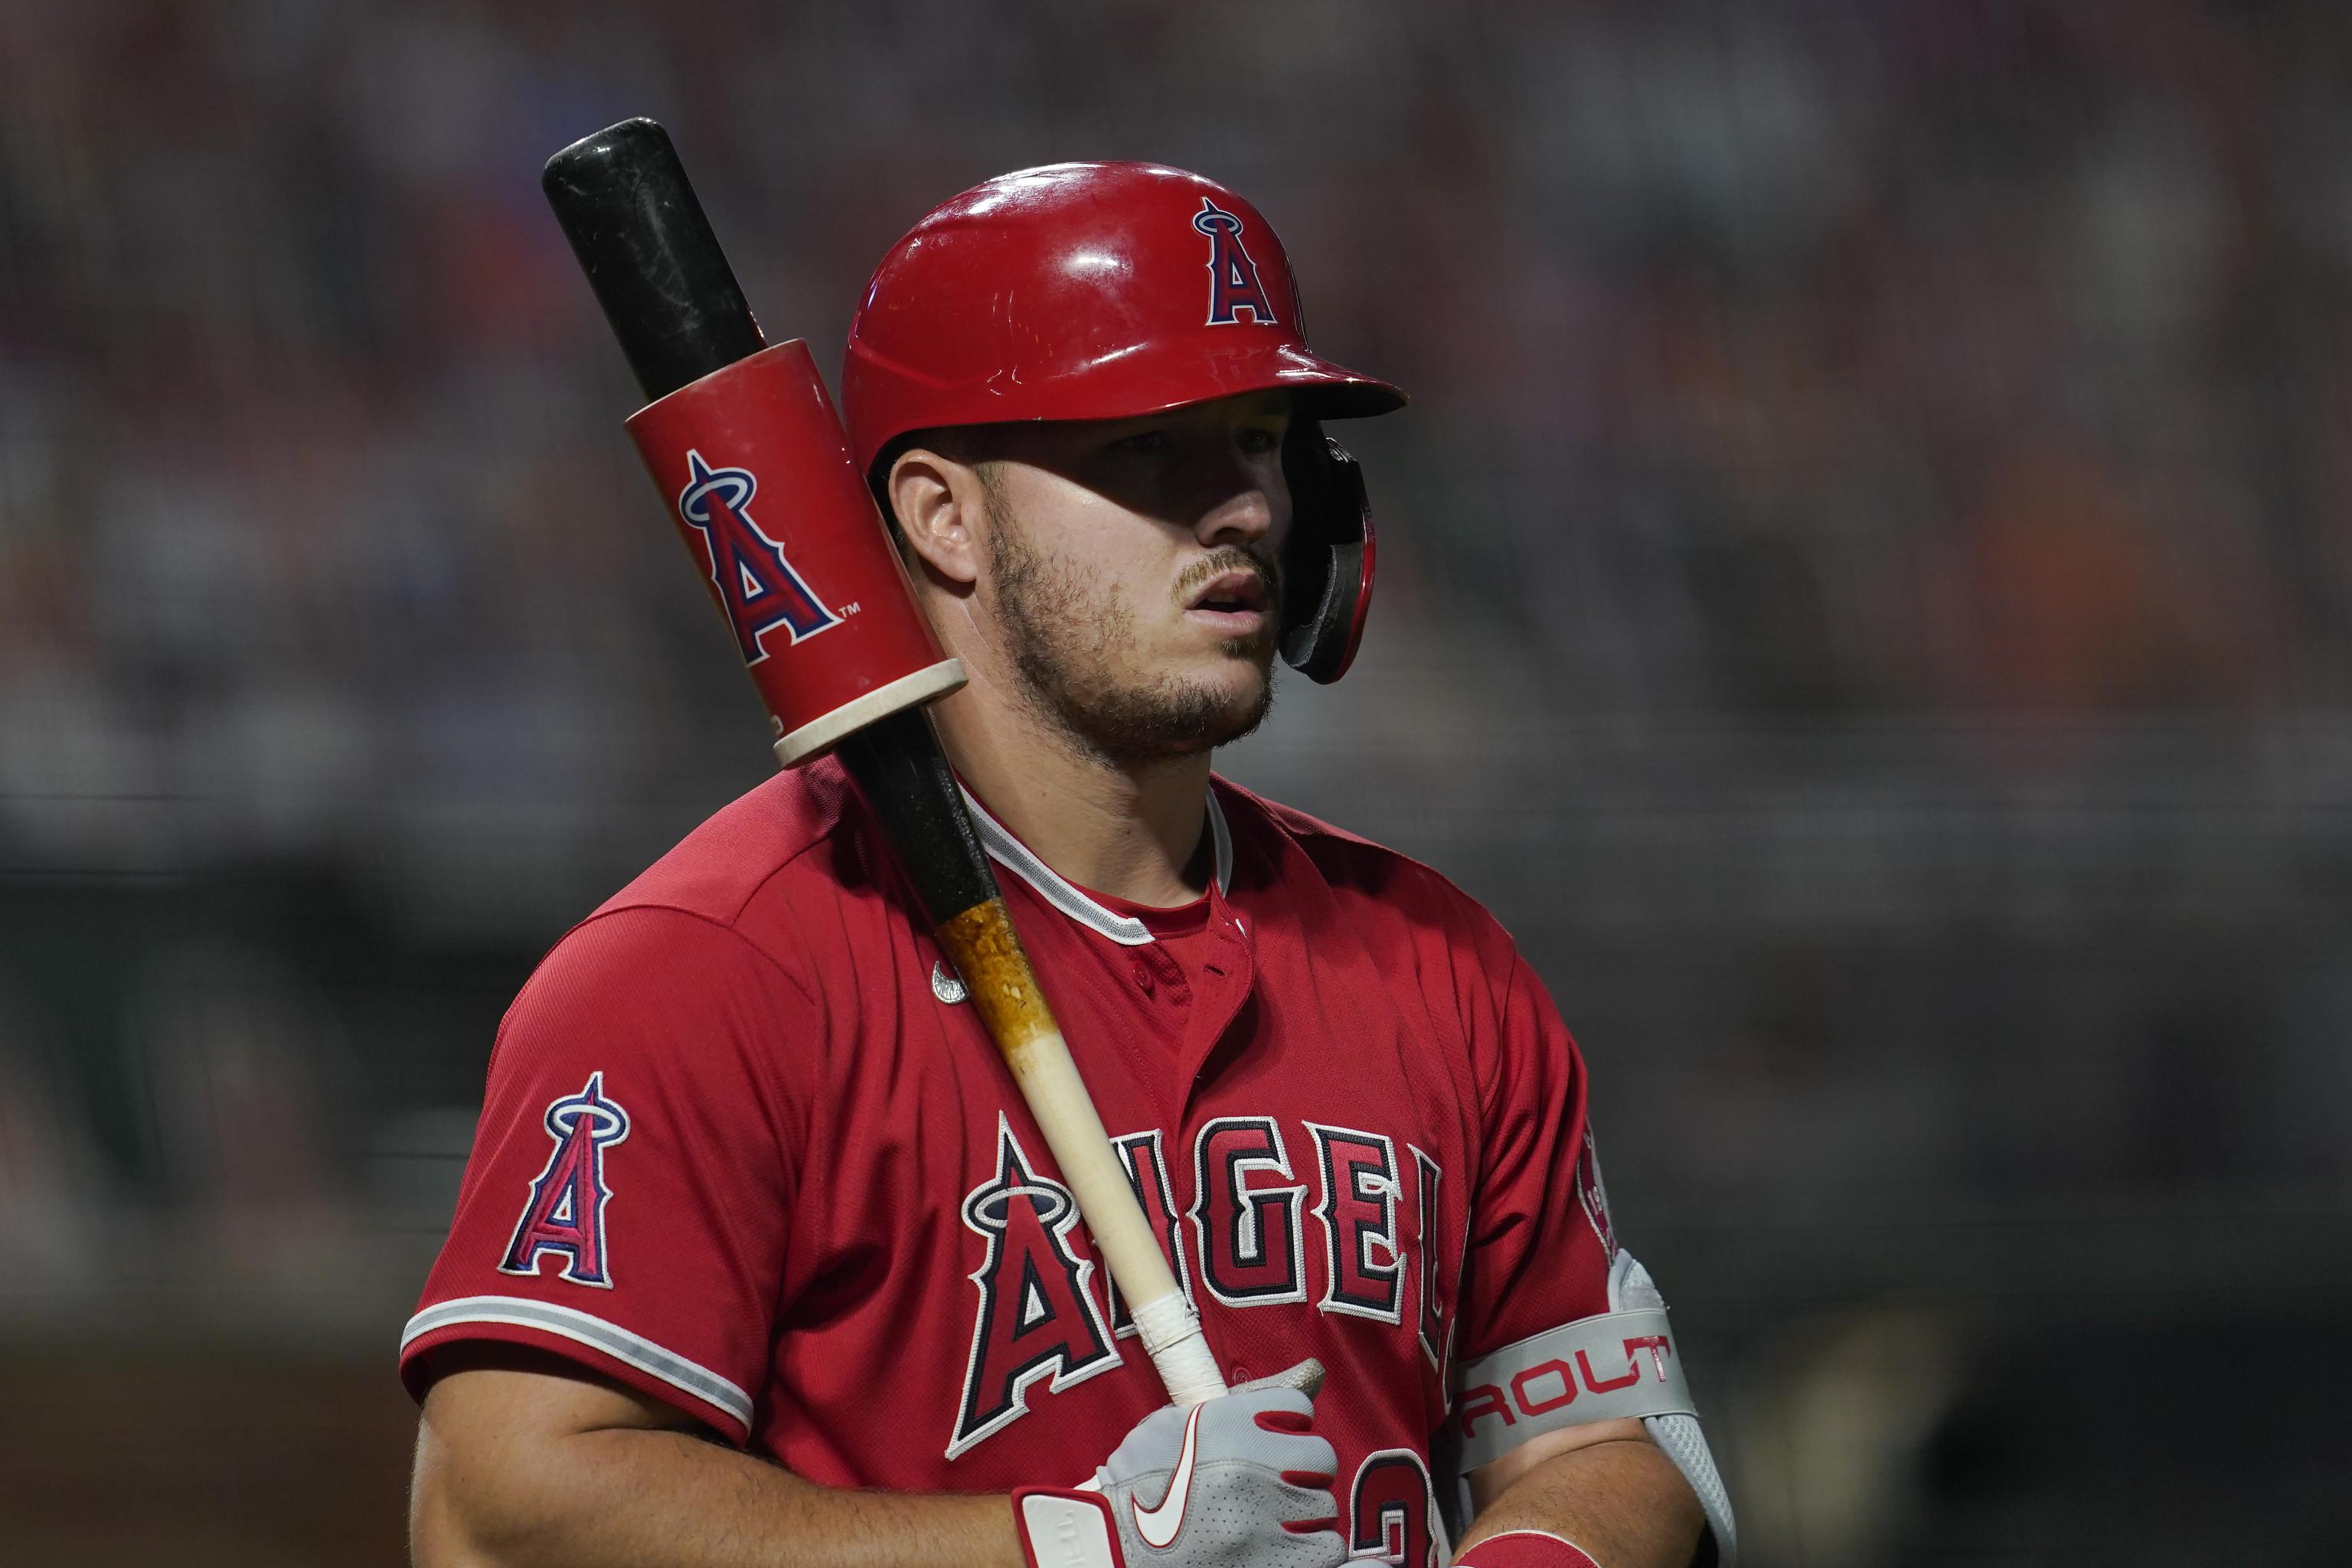 Mike Trout: Above Average Baseball person